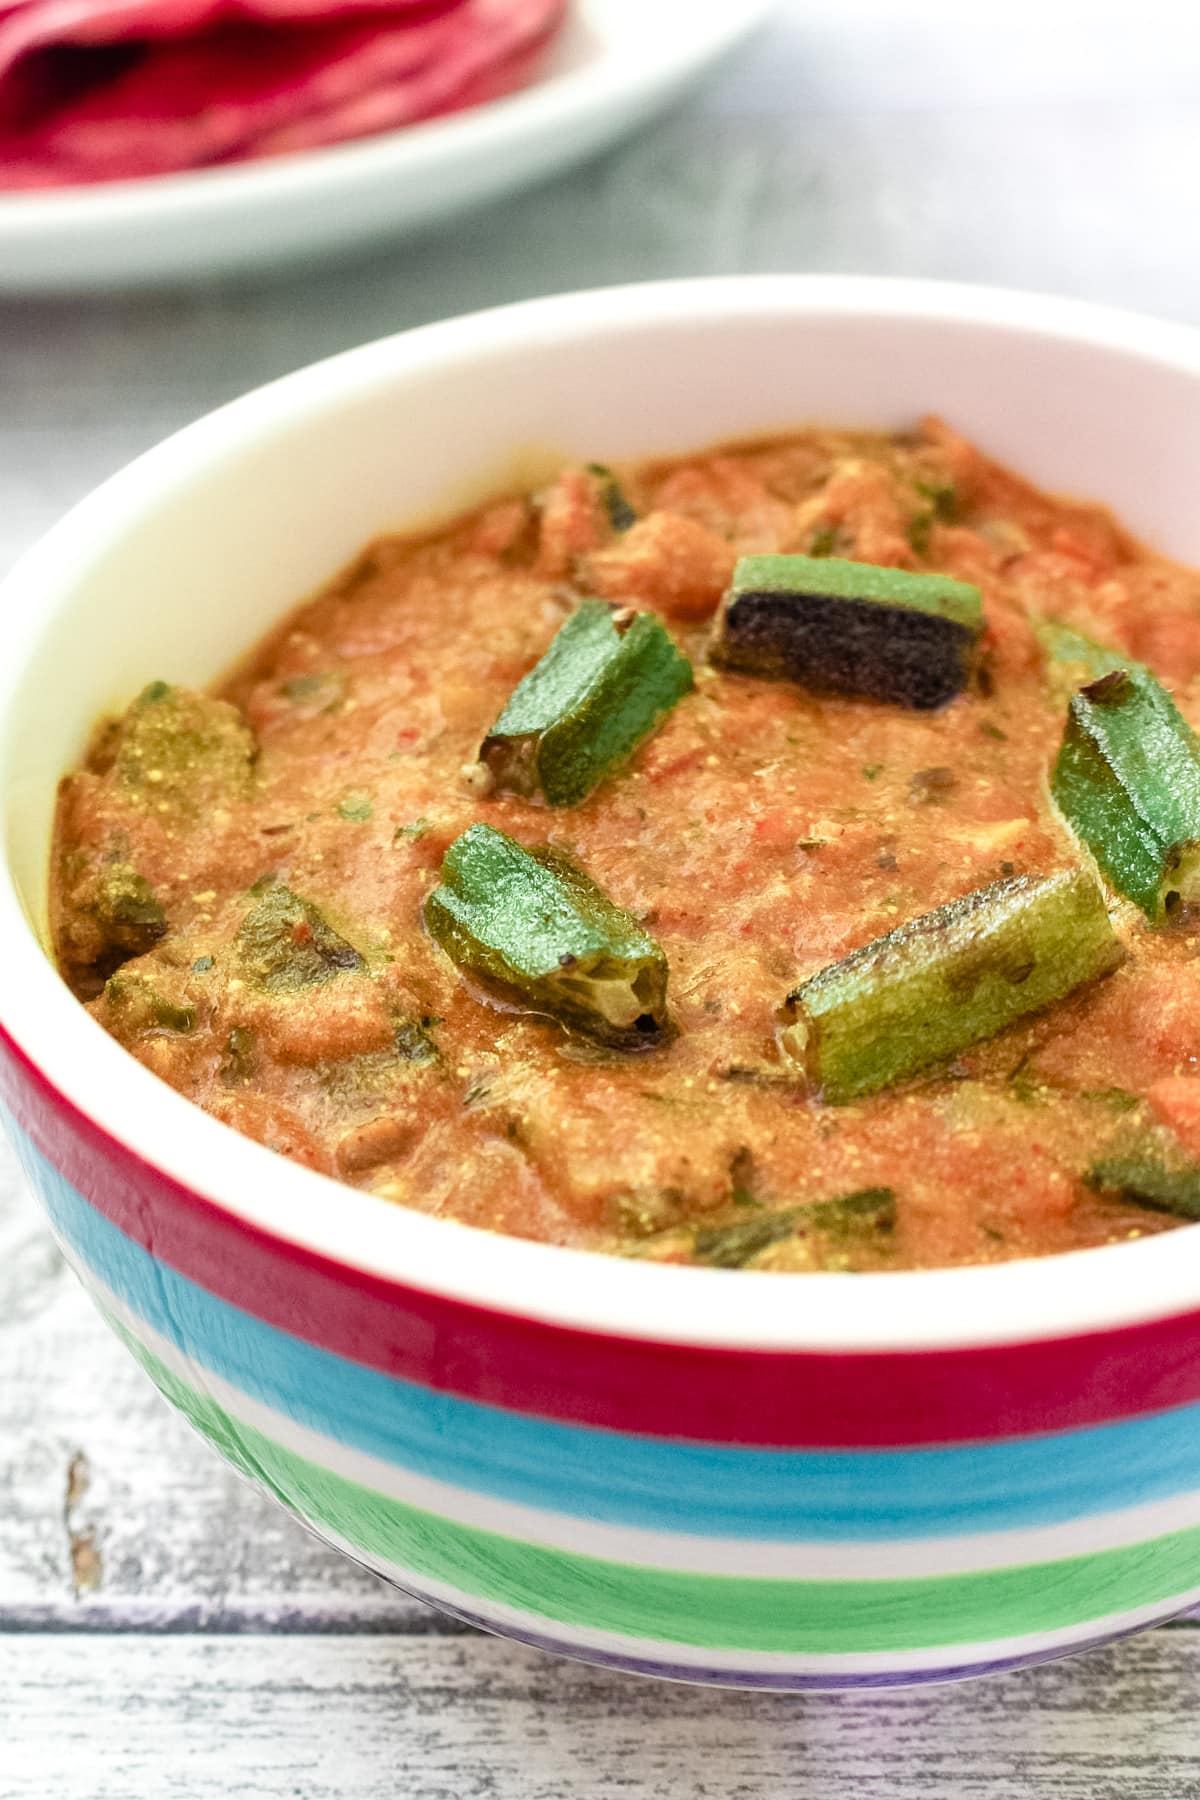 Dahi bhindi served in a bowl and garnished with few cooked okra pieces.